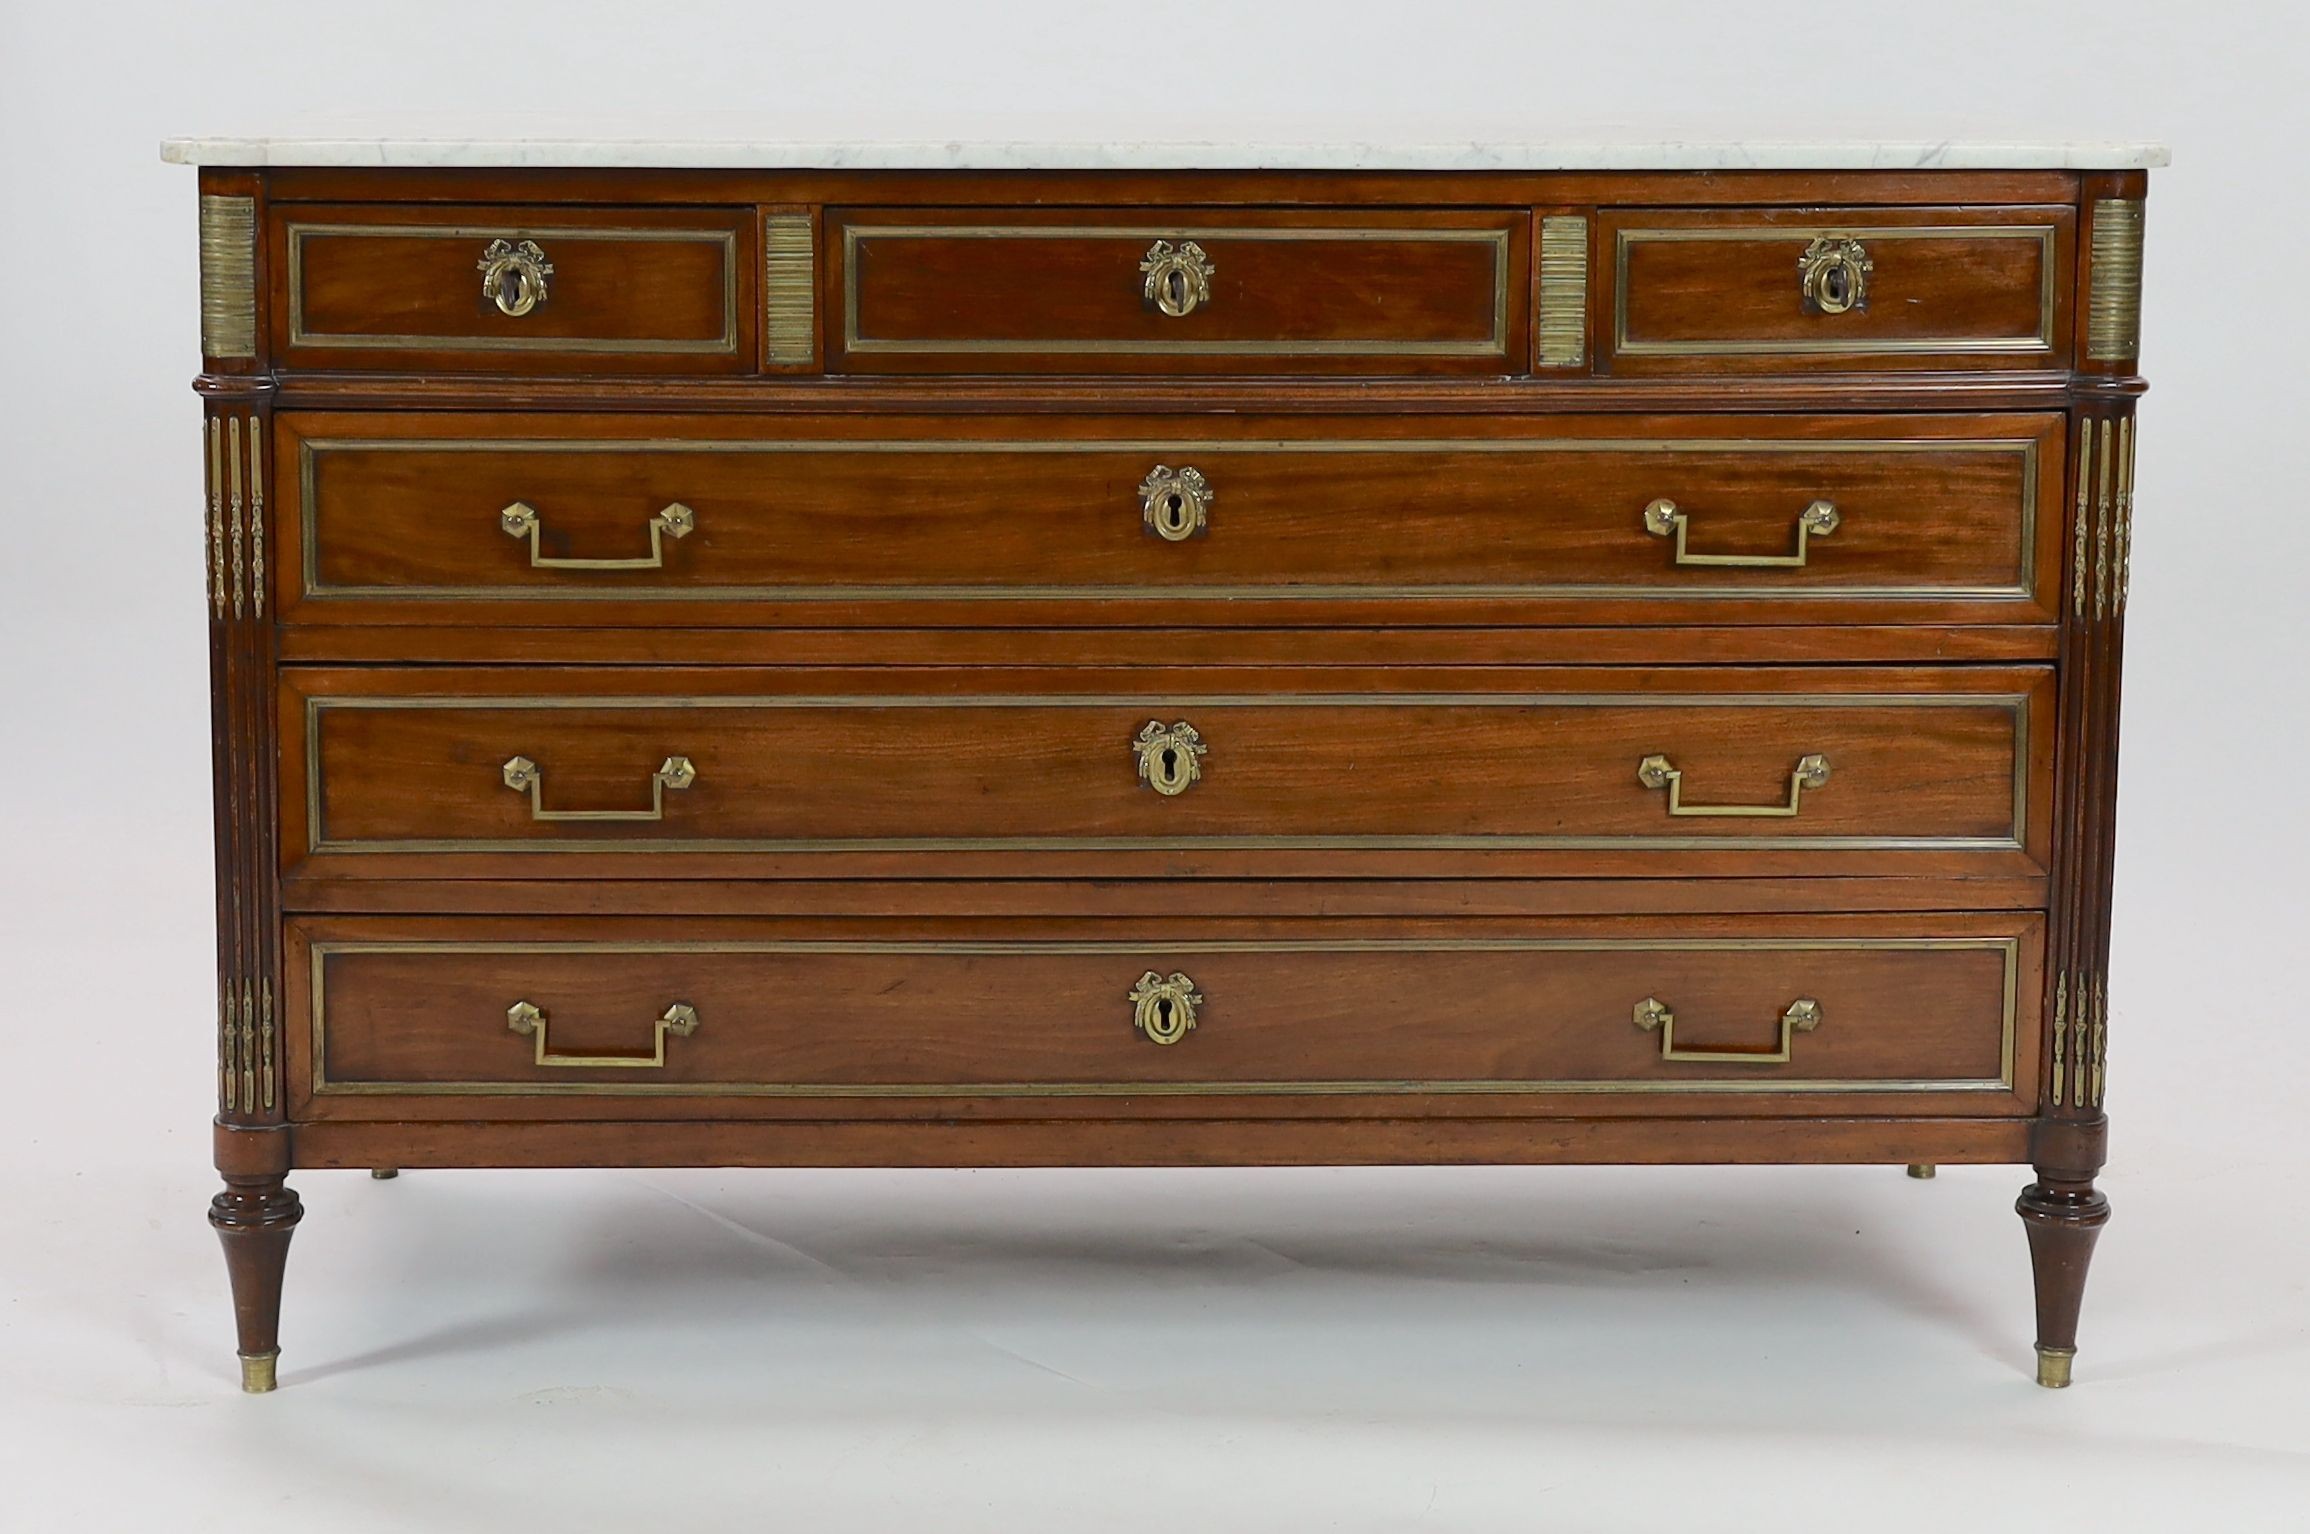 A 1790's French Directoire period brass mounted mahogany commode, W.146cm D.65cm H.95cm